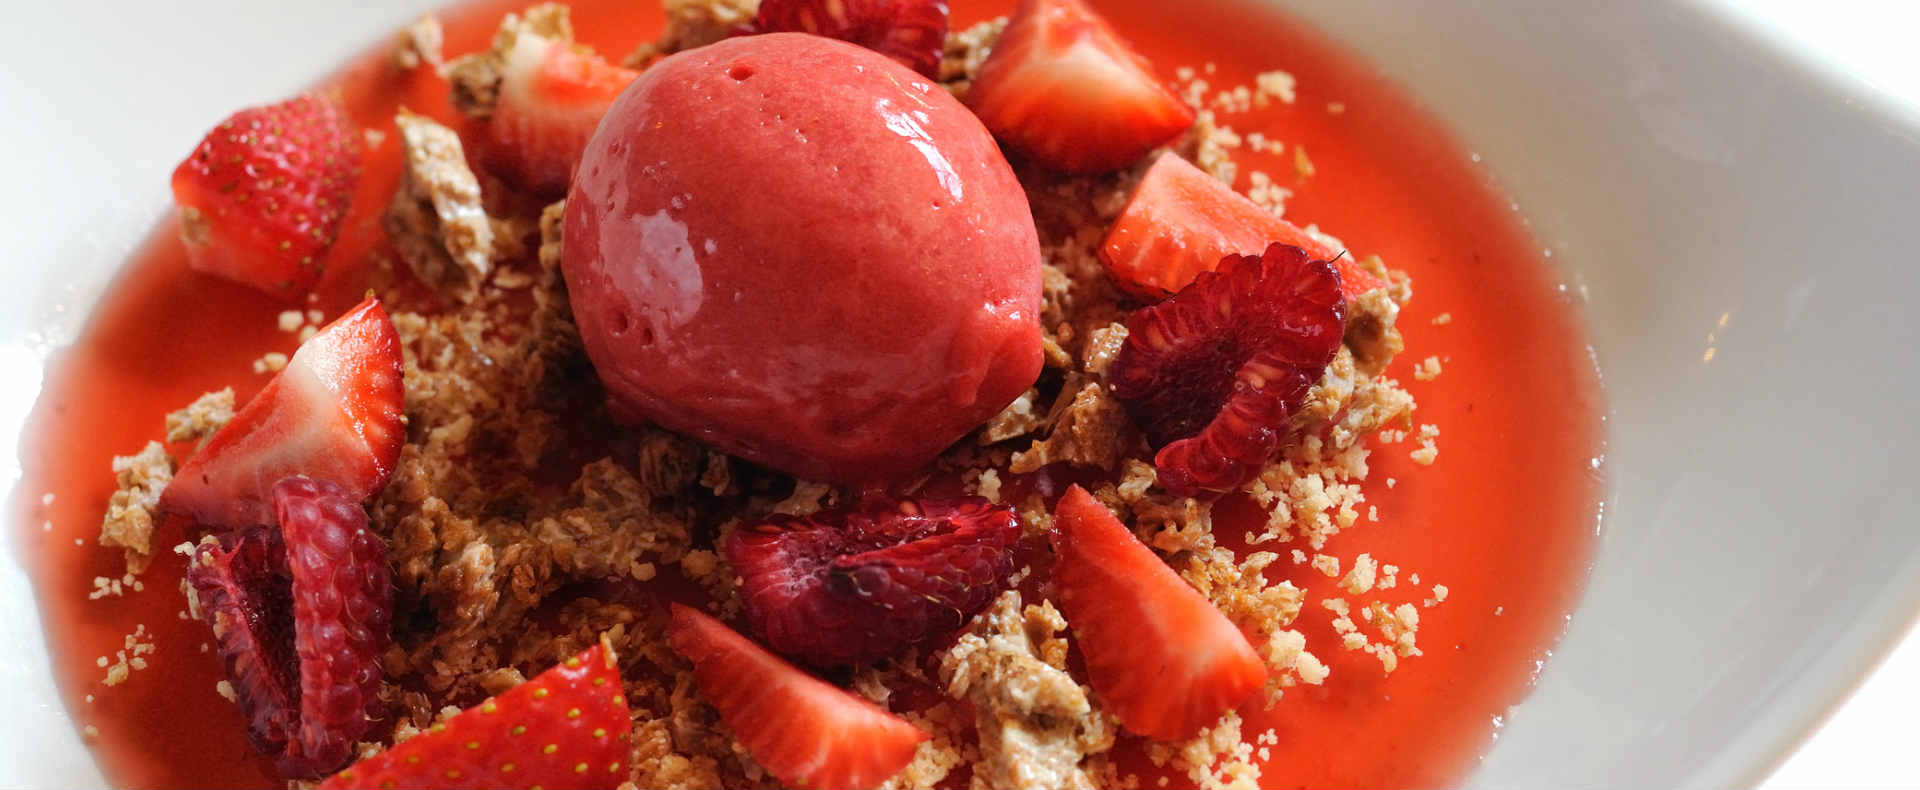 Eat The Seasons | New Forest Strawberry Dessert | Montagu Arms